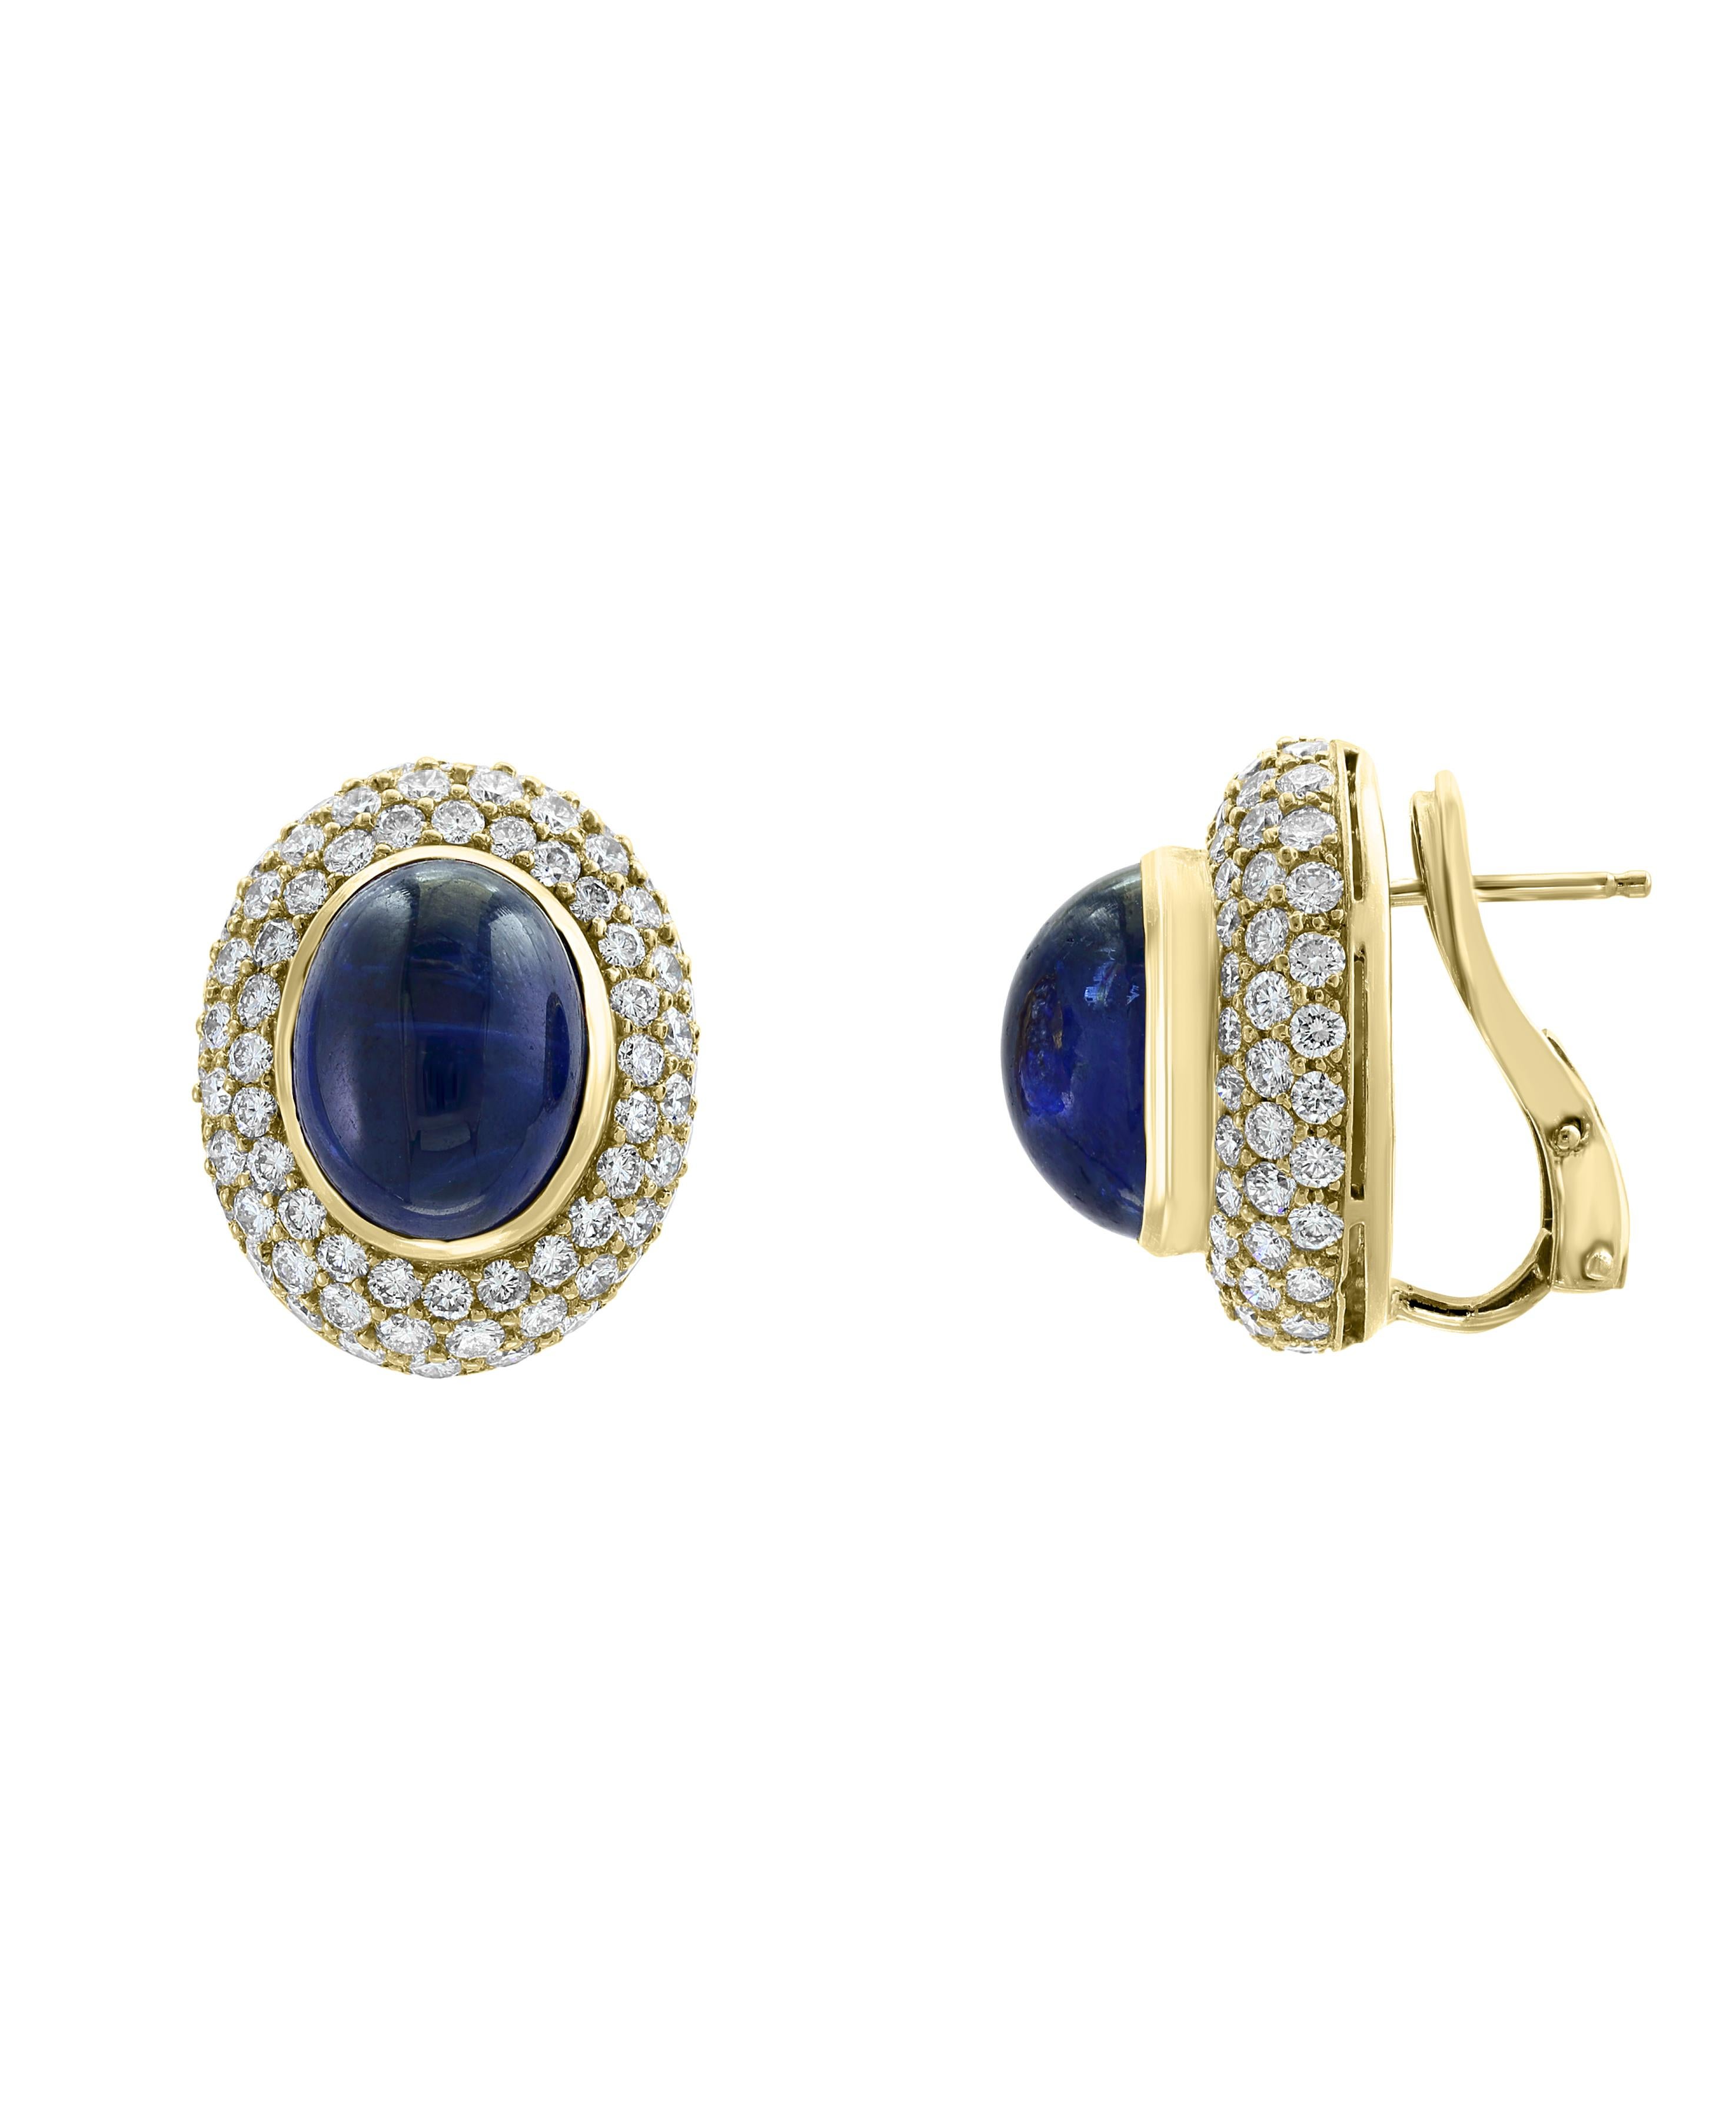 AGL Certified  Natural Ceylon Sapphire  Cabochon  Stud/clip  Earring 18 Kt Gold
15 Carat blue Ceylon  Sapphire  Cabochon and Diamond Stud  Earring 18 Karat White Gold.
 perfect pair made in  18 carat Yellow gold . 
18 K gold 23 Grams
 Diamonds: